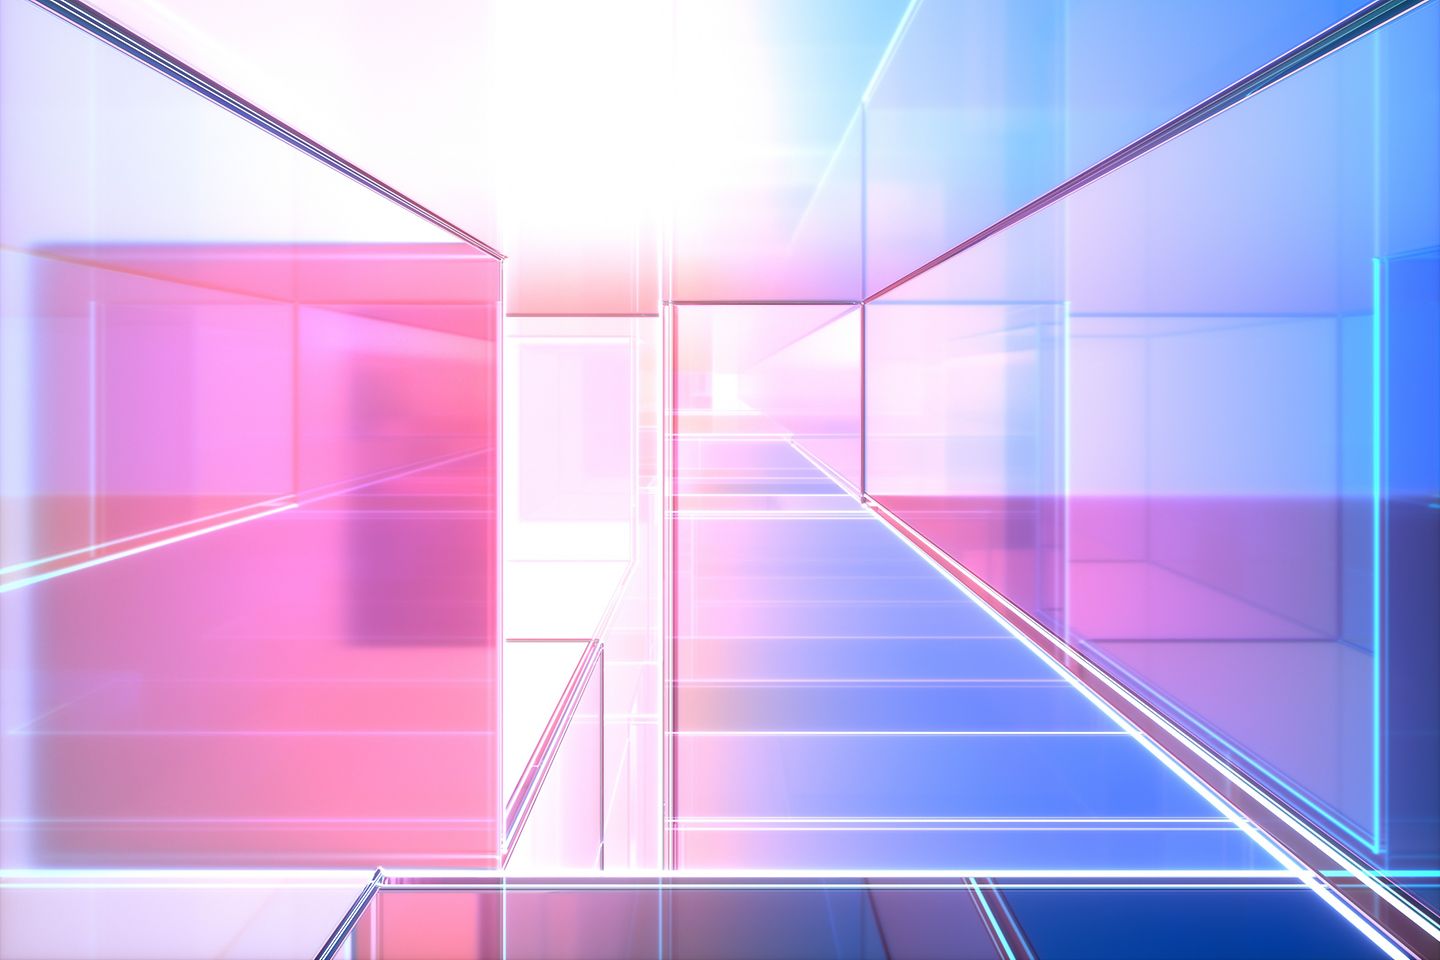 Pink-blue colored prism-cuboid